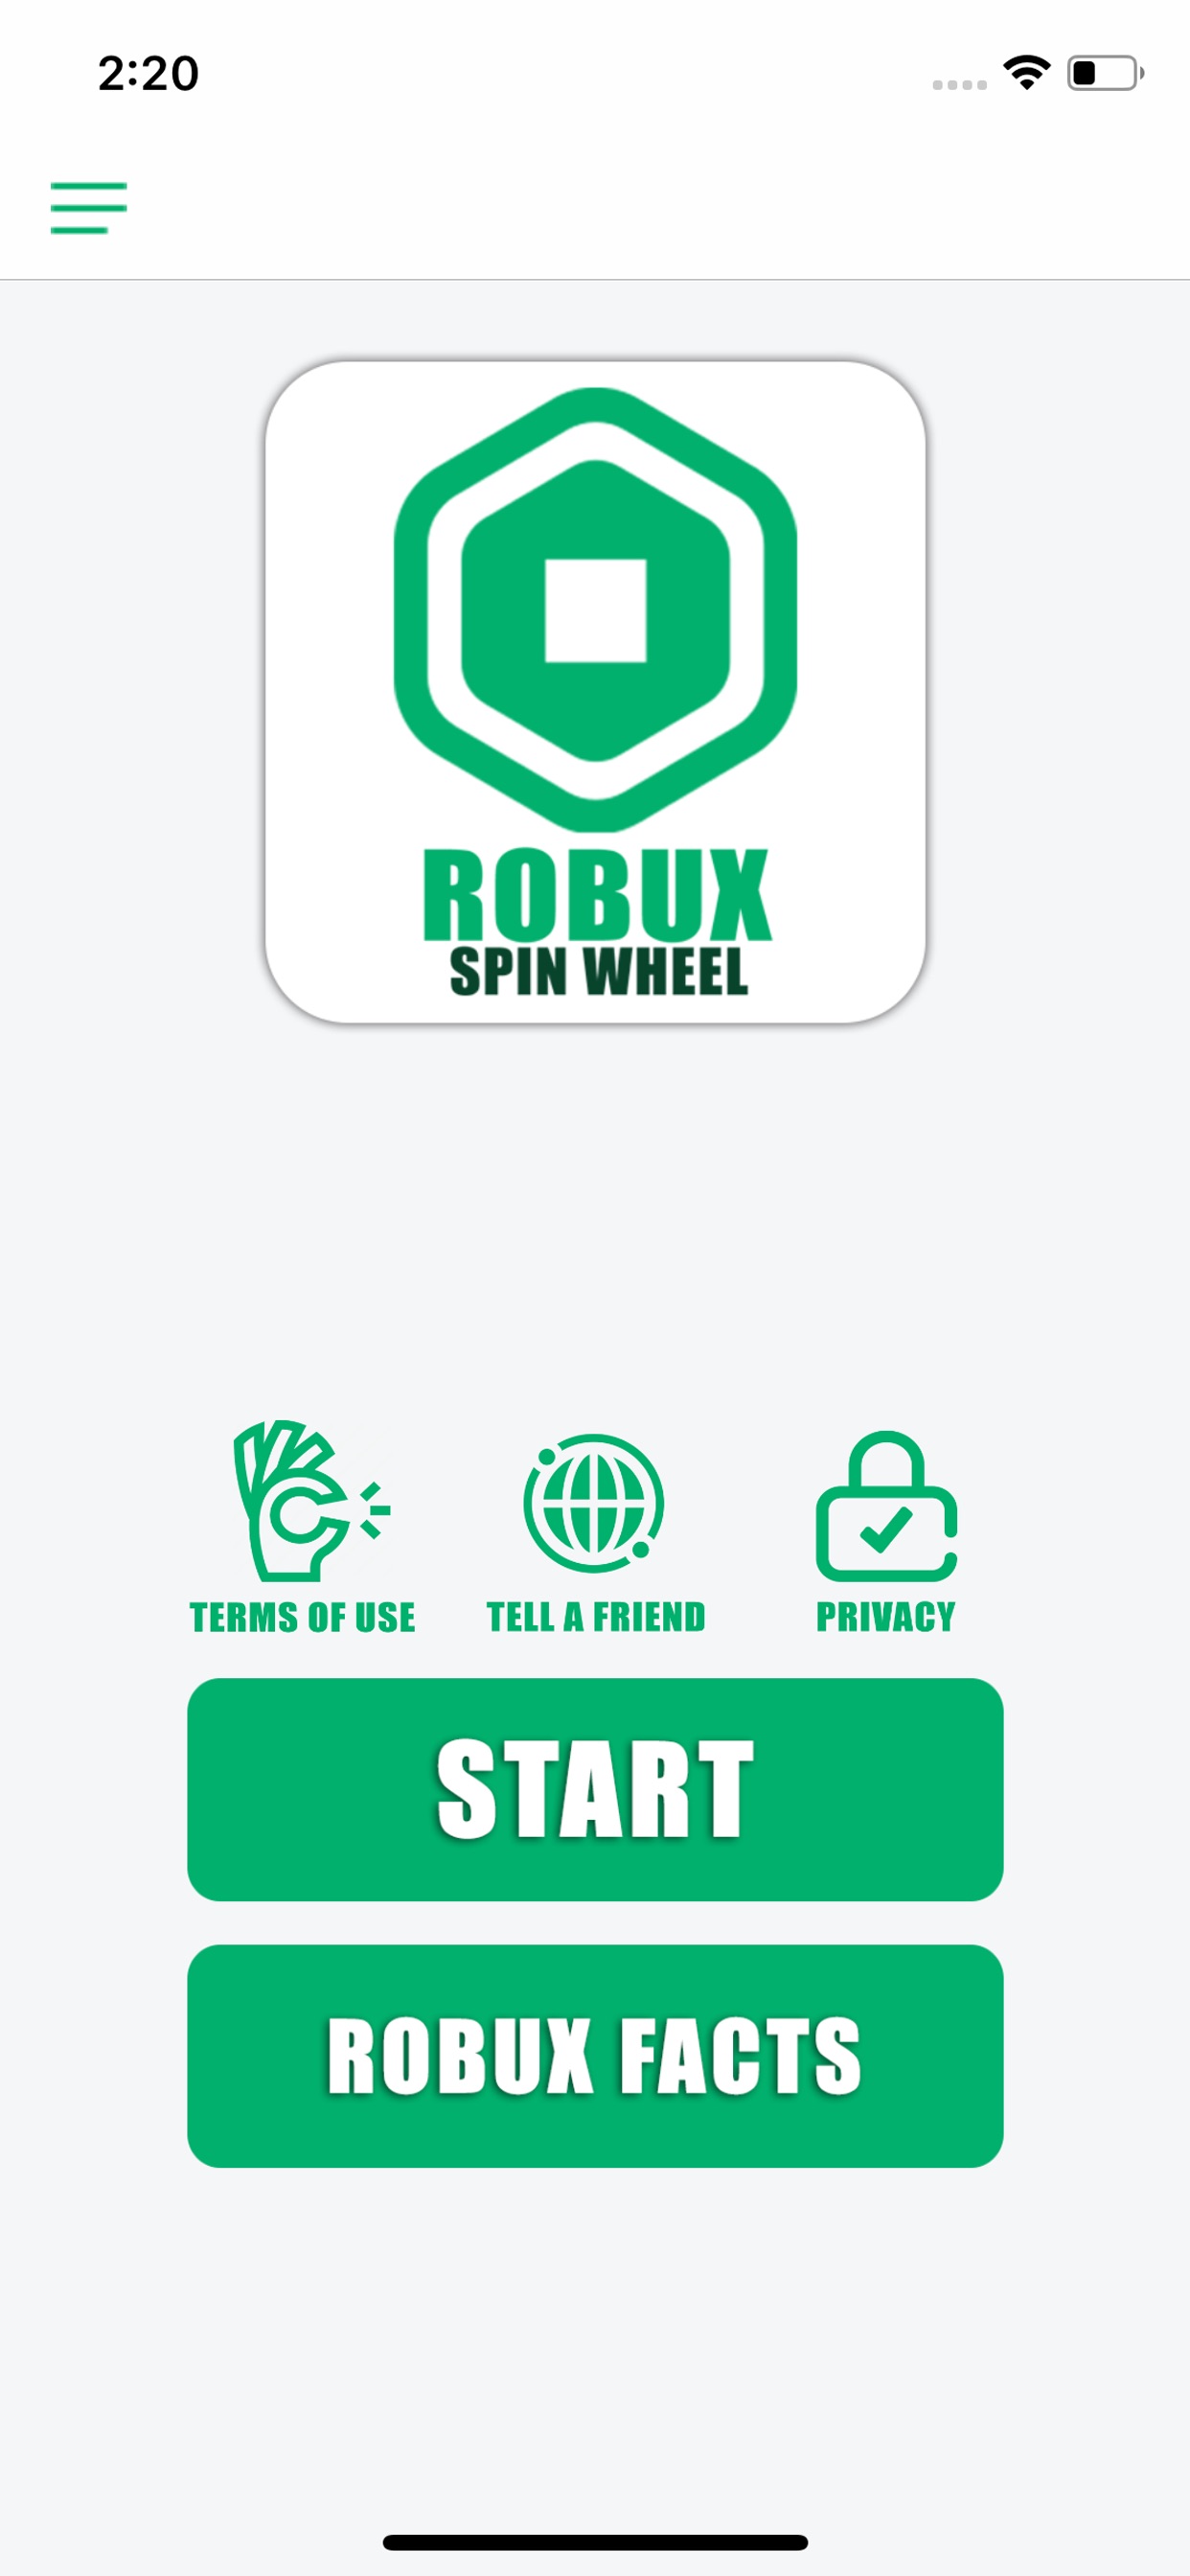 Robux Spin Wheel For Roblox App Store Review Aso Revenue Downloads Appfollow - buy 80 robux on pc robux generator tutorial